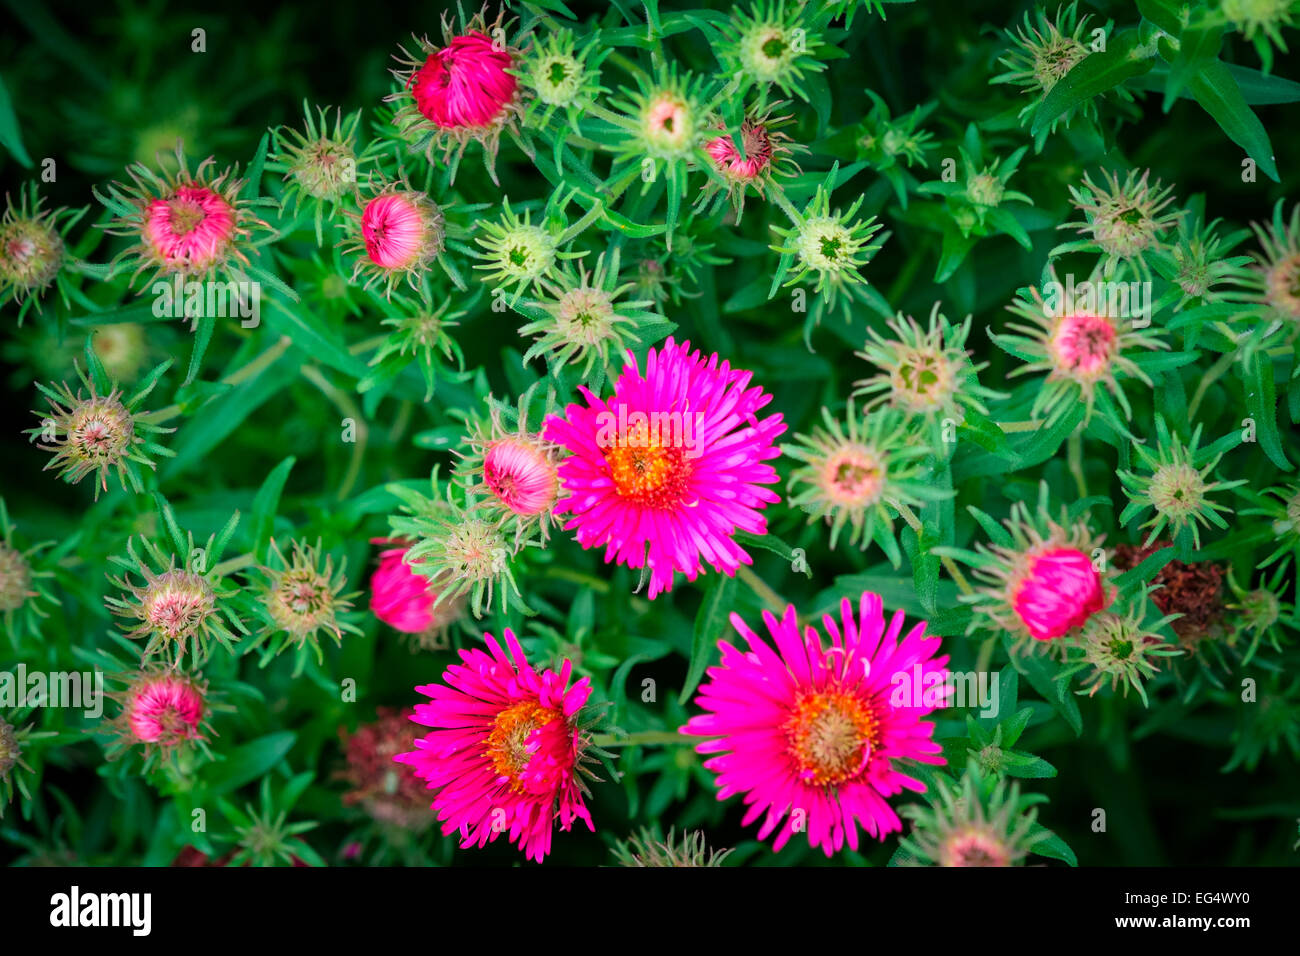 Detail of pink asters in garden Stock Photo